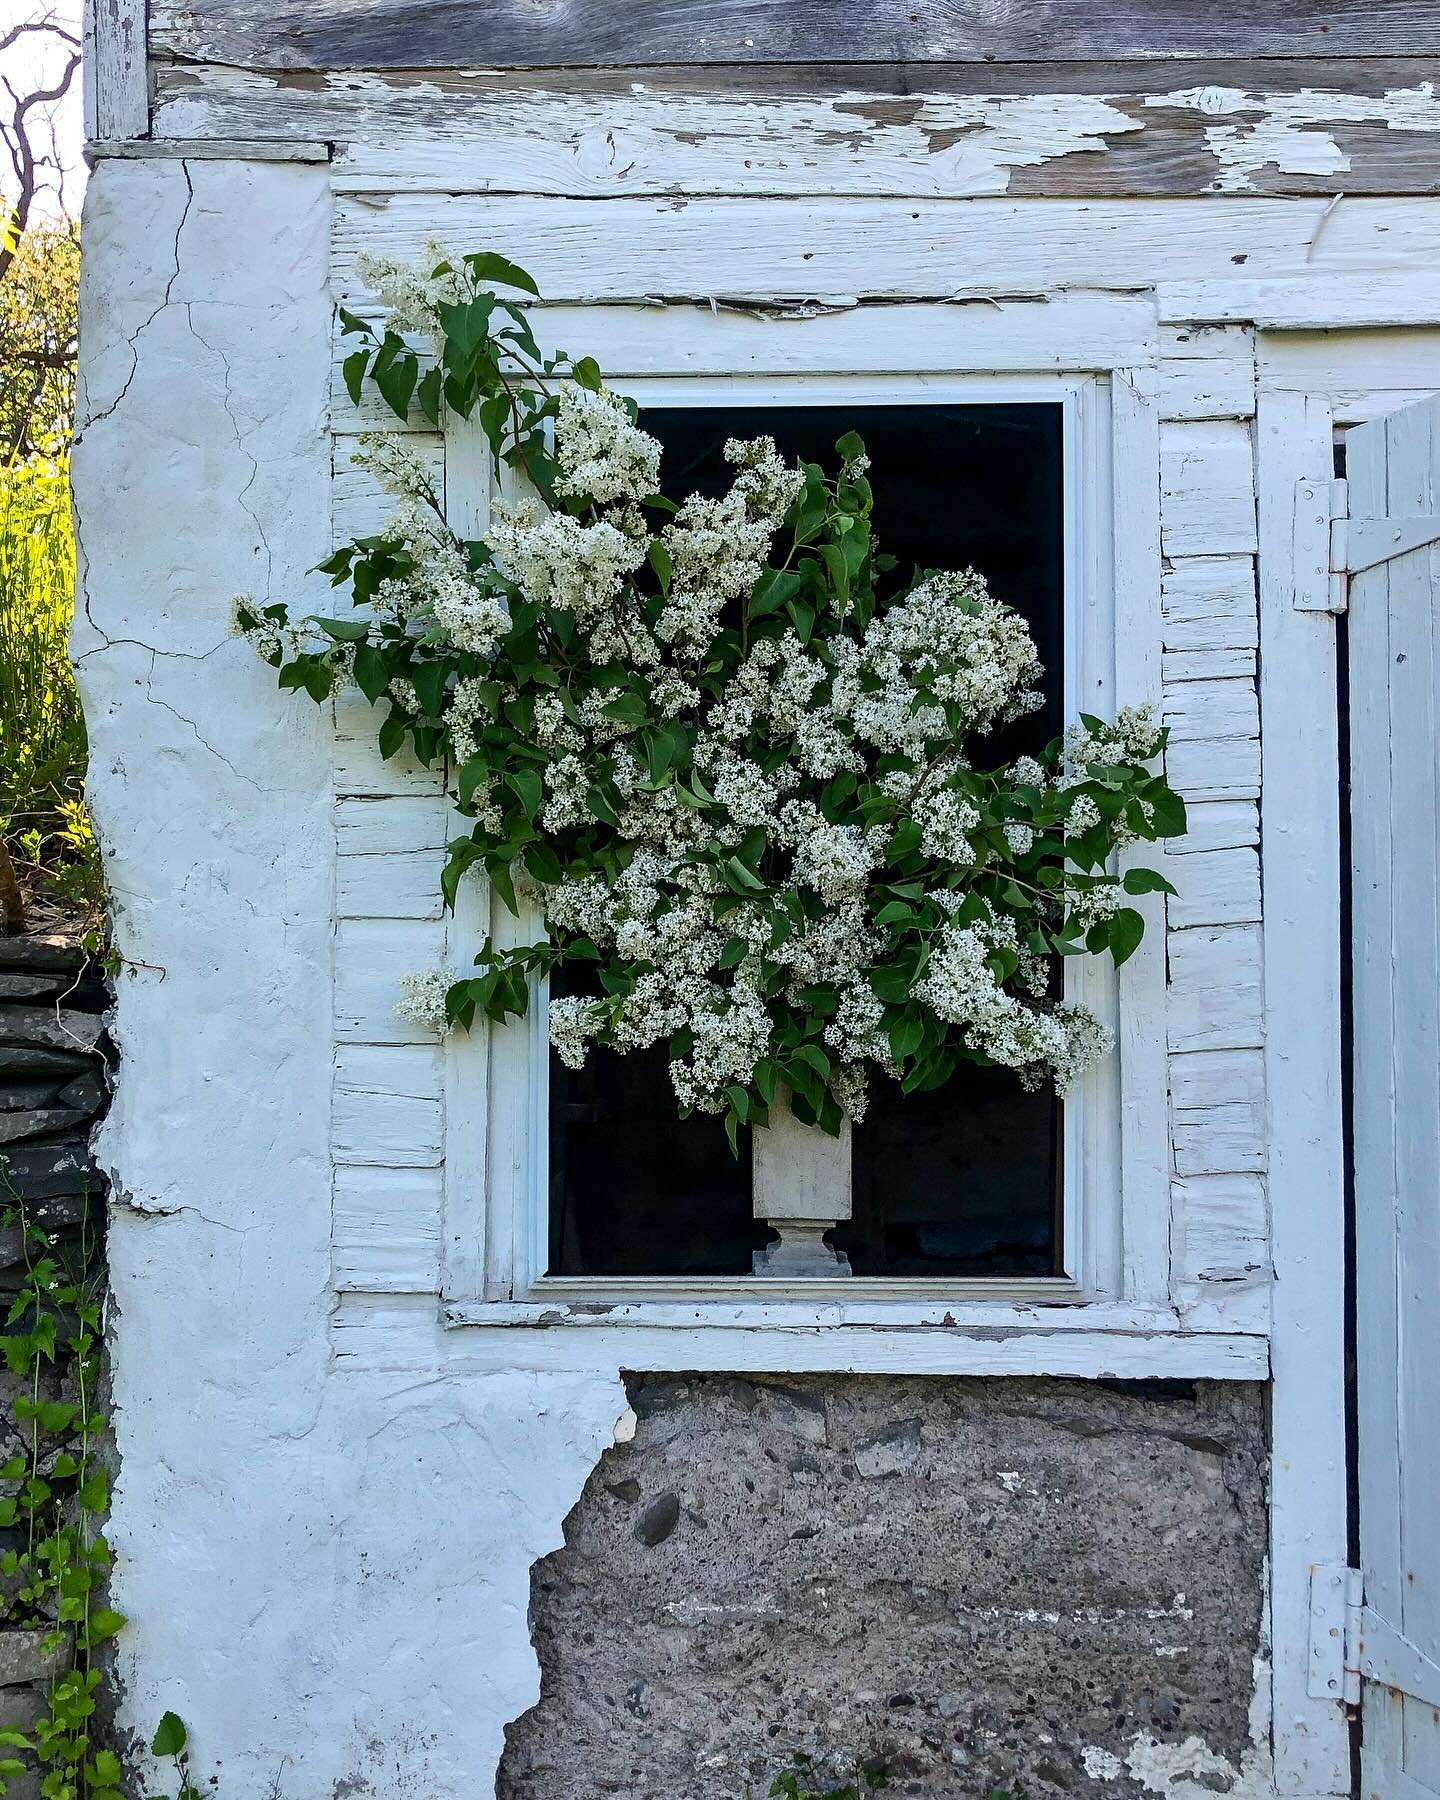 Open this Mothers Day Sunday 11-4 with @furbelow_and_bibelot tulipieres, our new porcelain vessels and fresh, romantic bouquets to compliment them. Visit, explore and take part in the heavenly scented atmosphere all around the knoll.